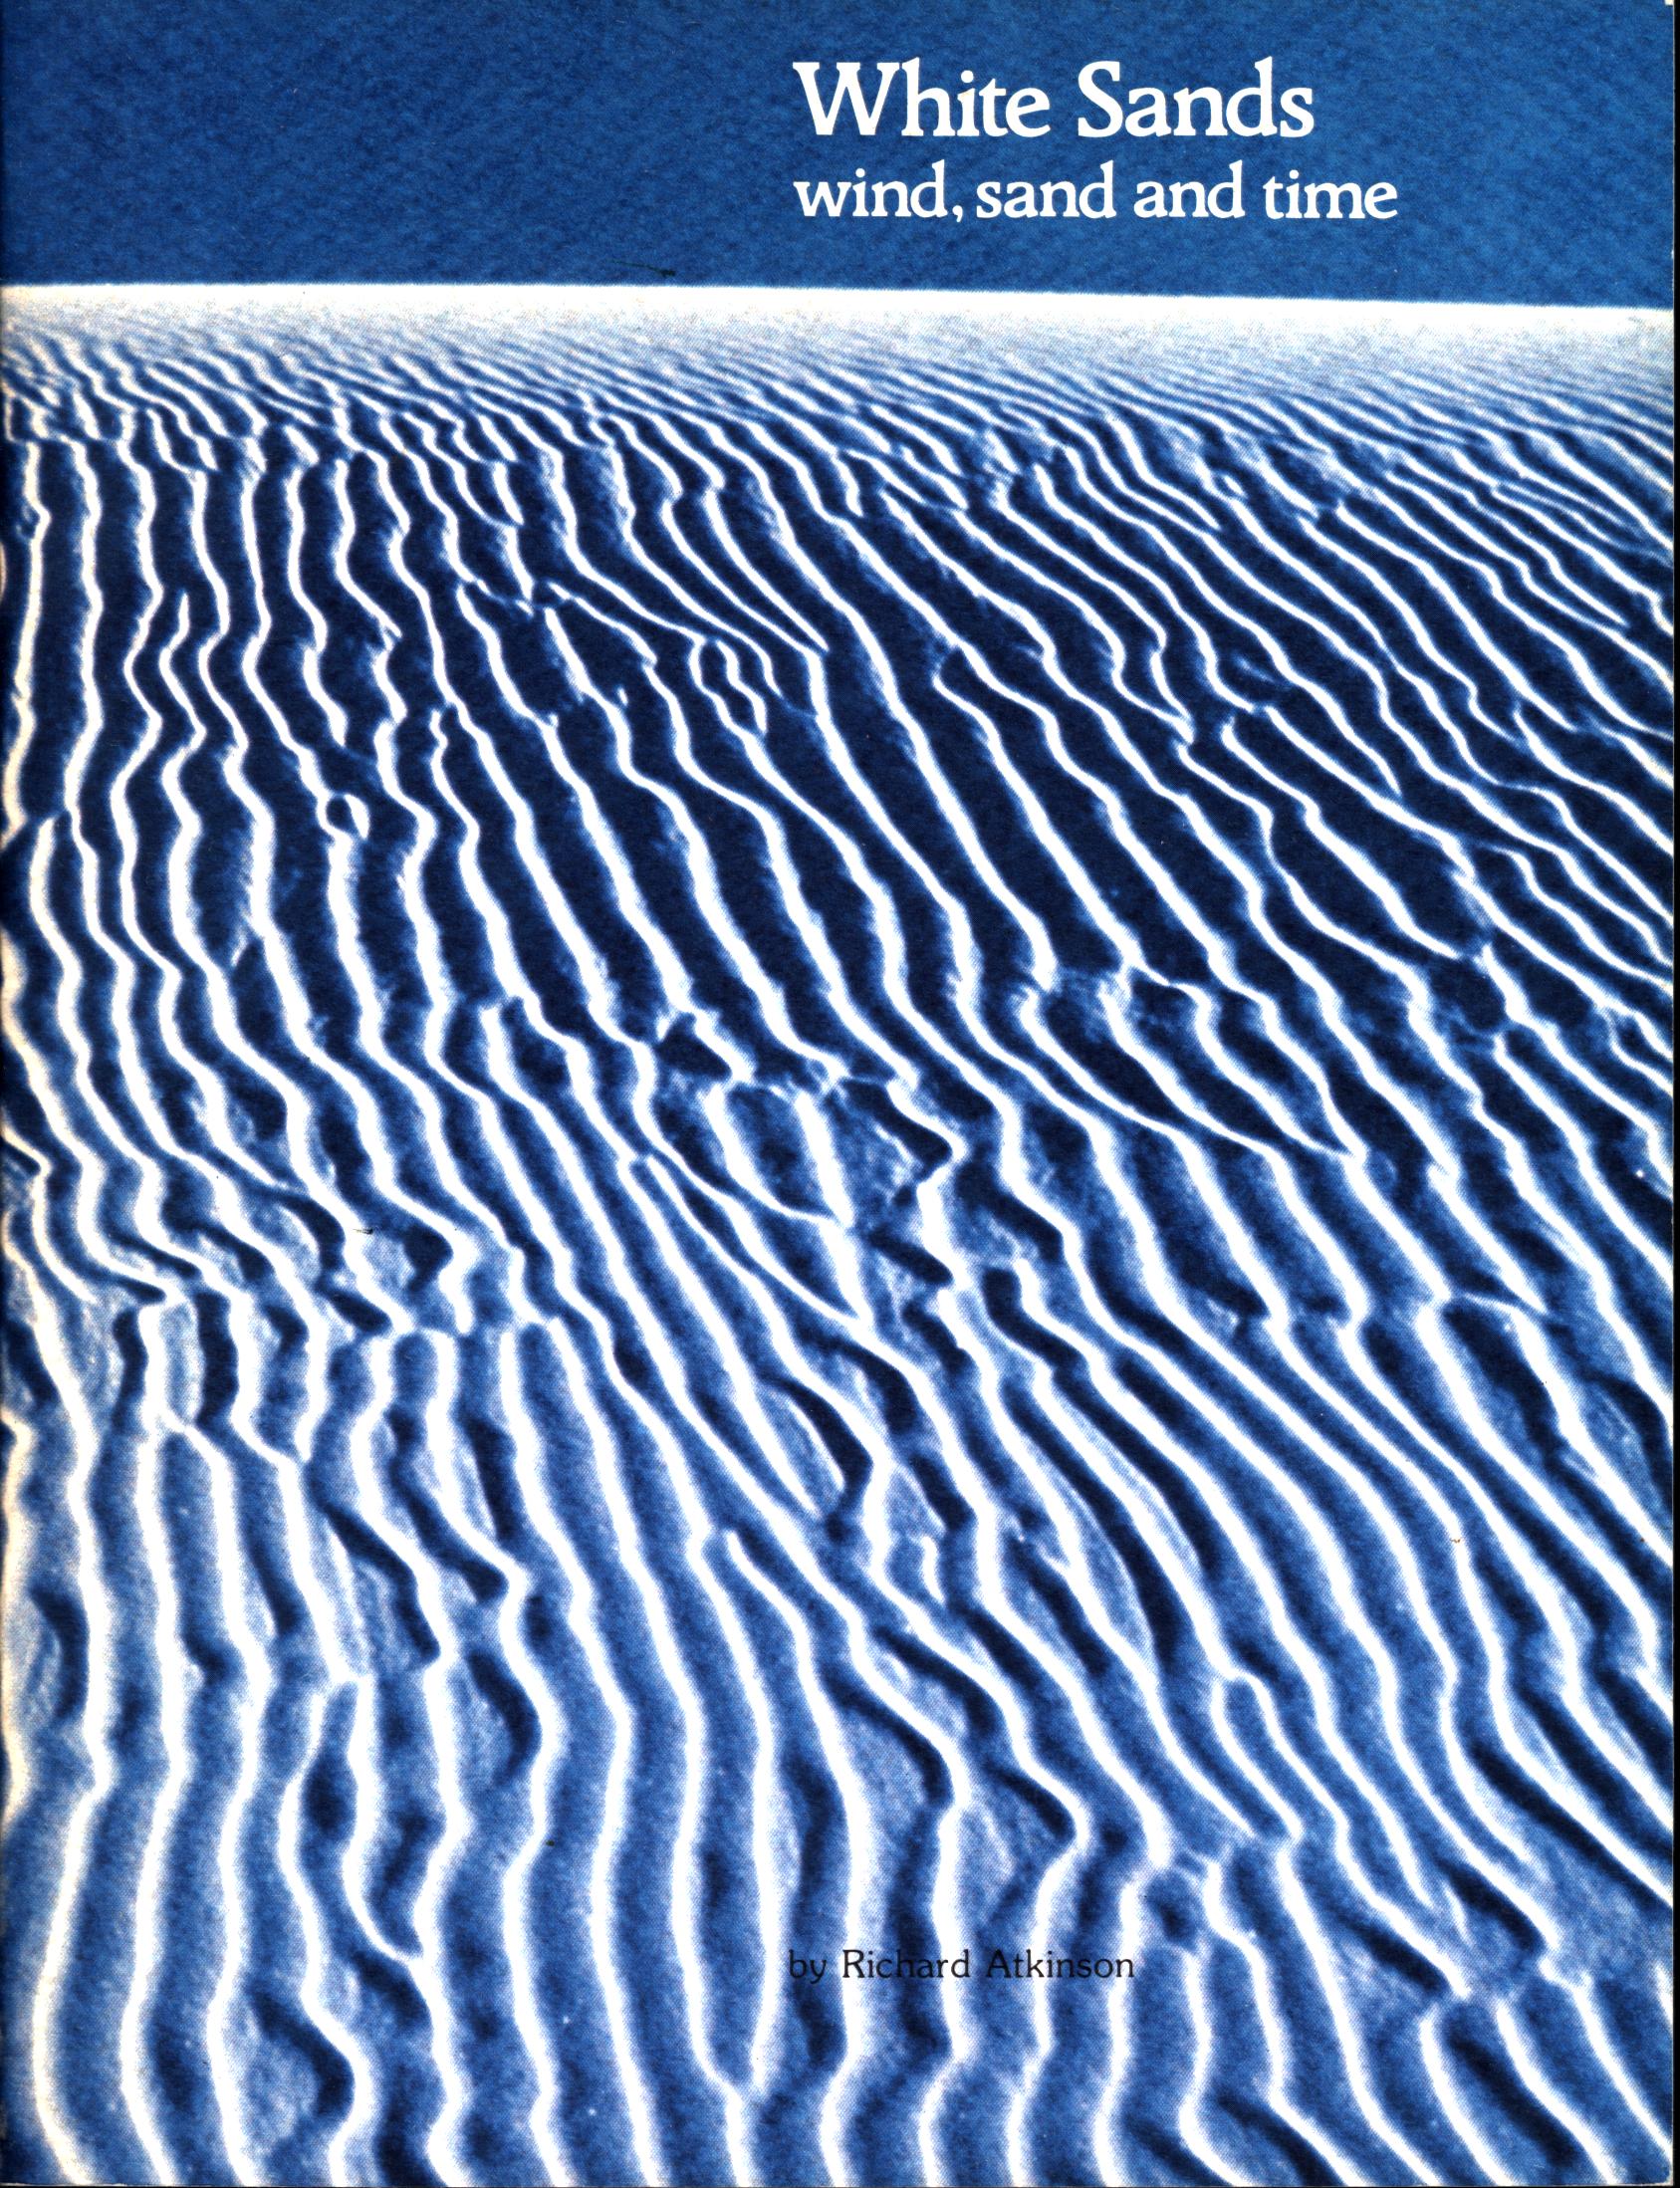 WHITE SANDS: wind, sand, and time (NM). 